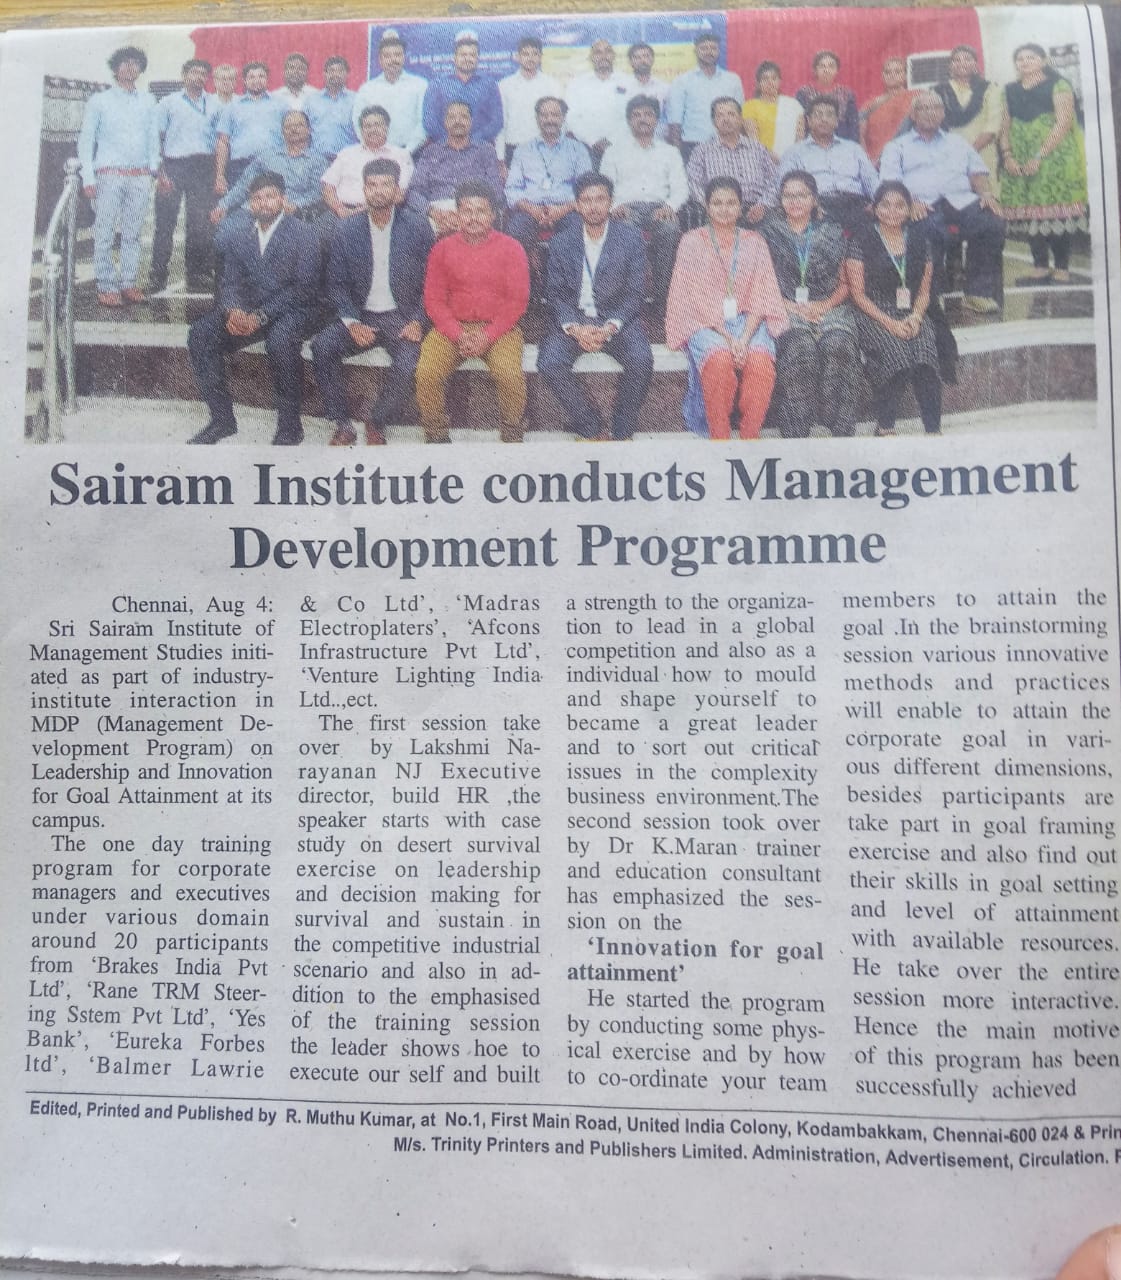 MDP Programme conducted by sairam Institute Of management Studies